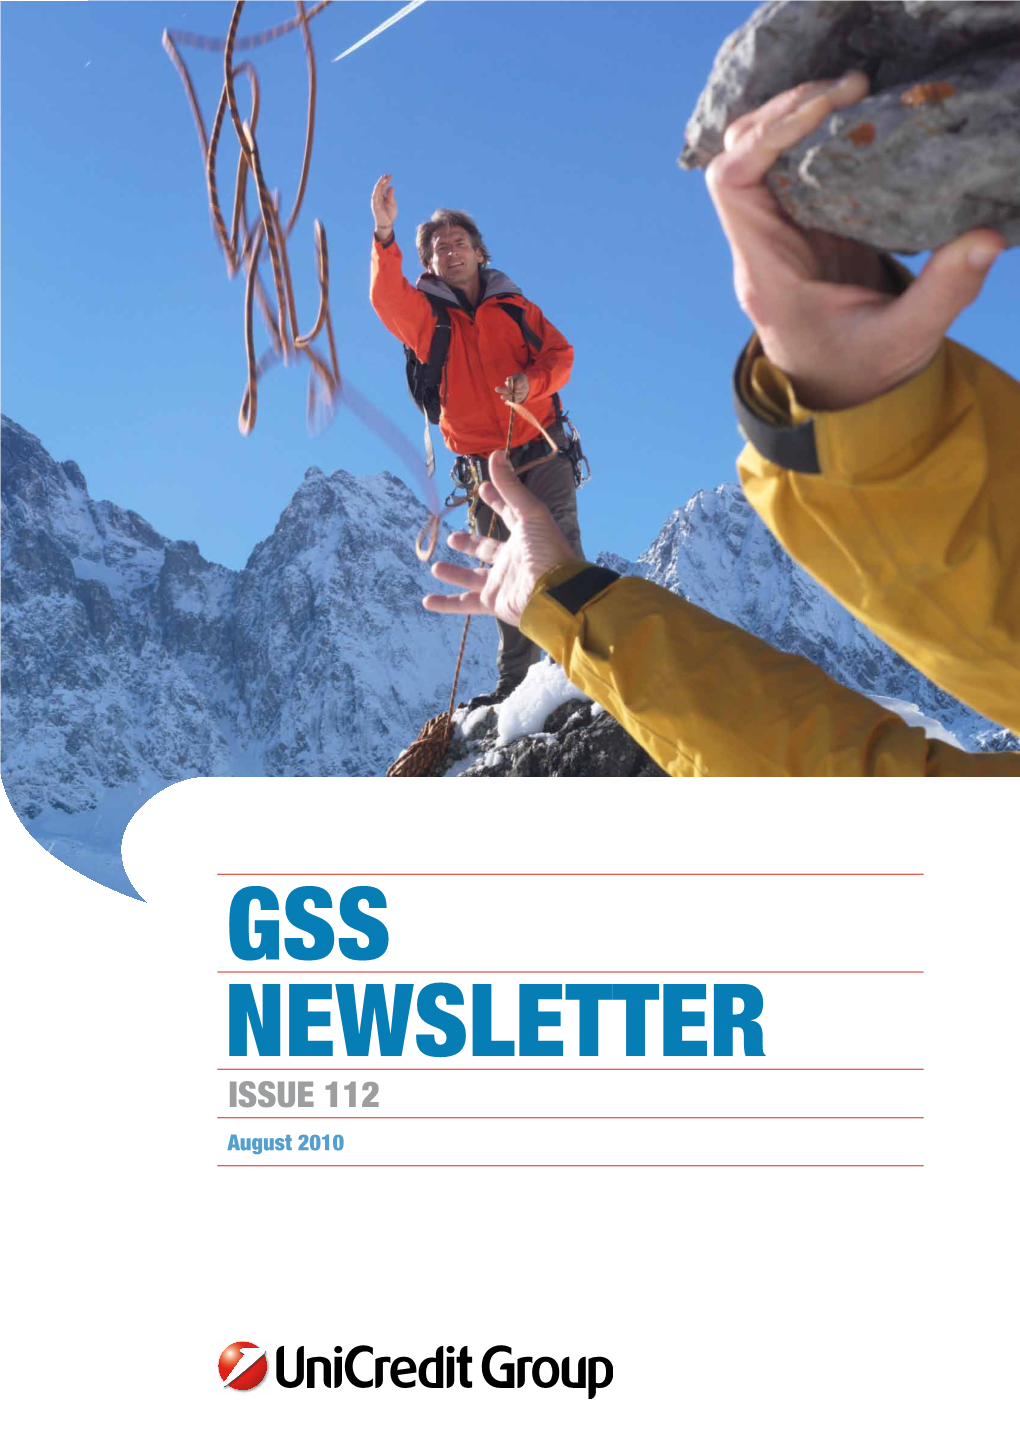 GSS NEWSLETTER ISSUE 112 August 2010 ﻿ 2